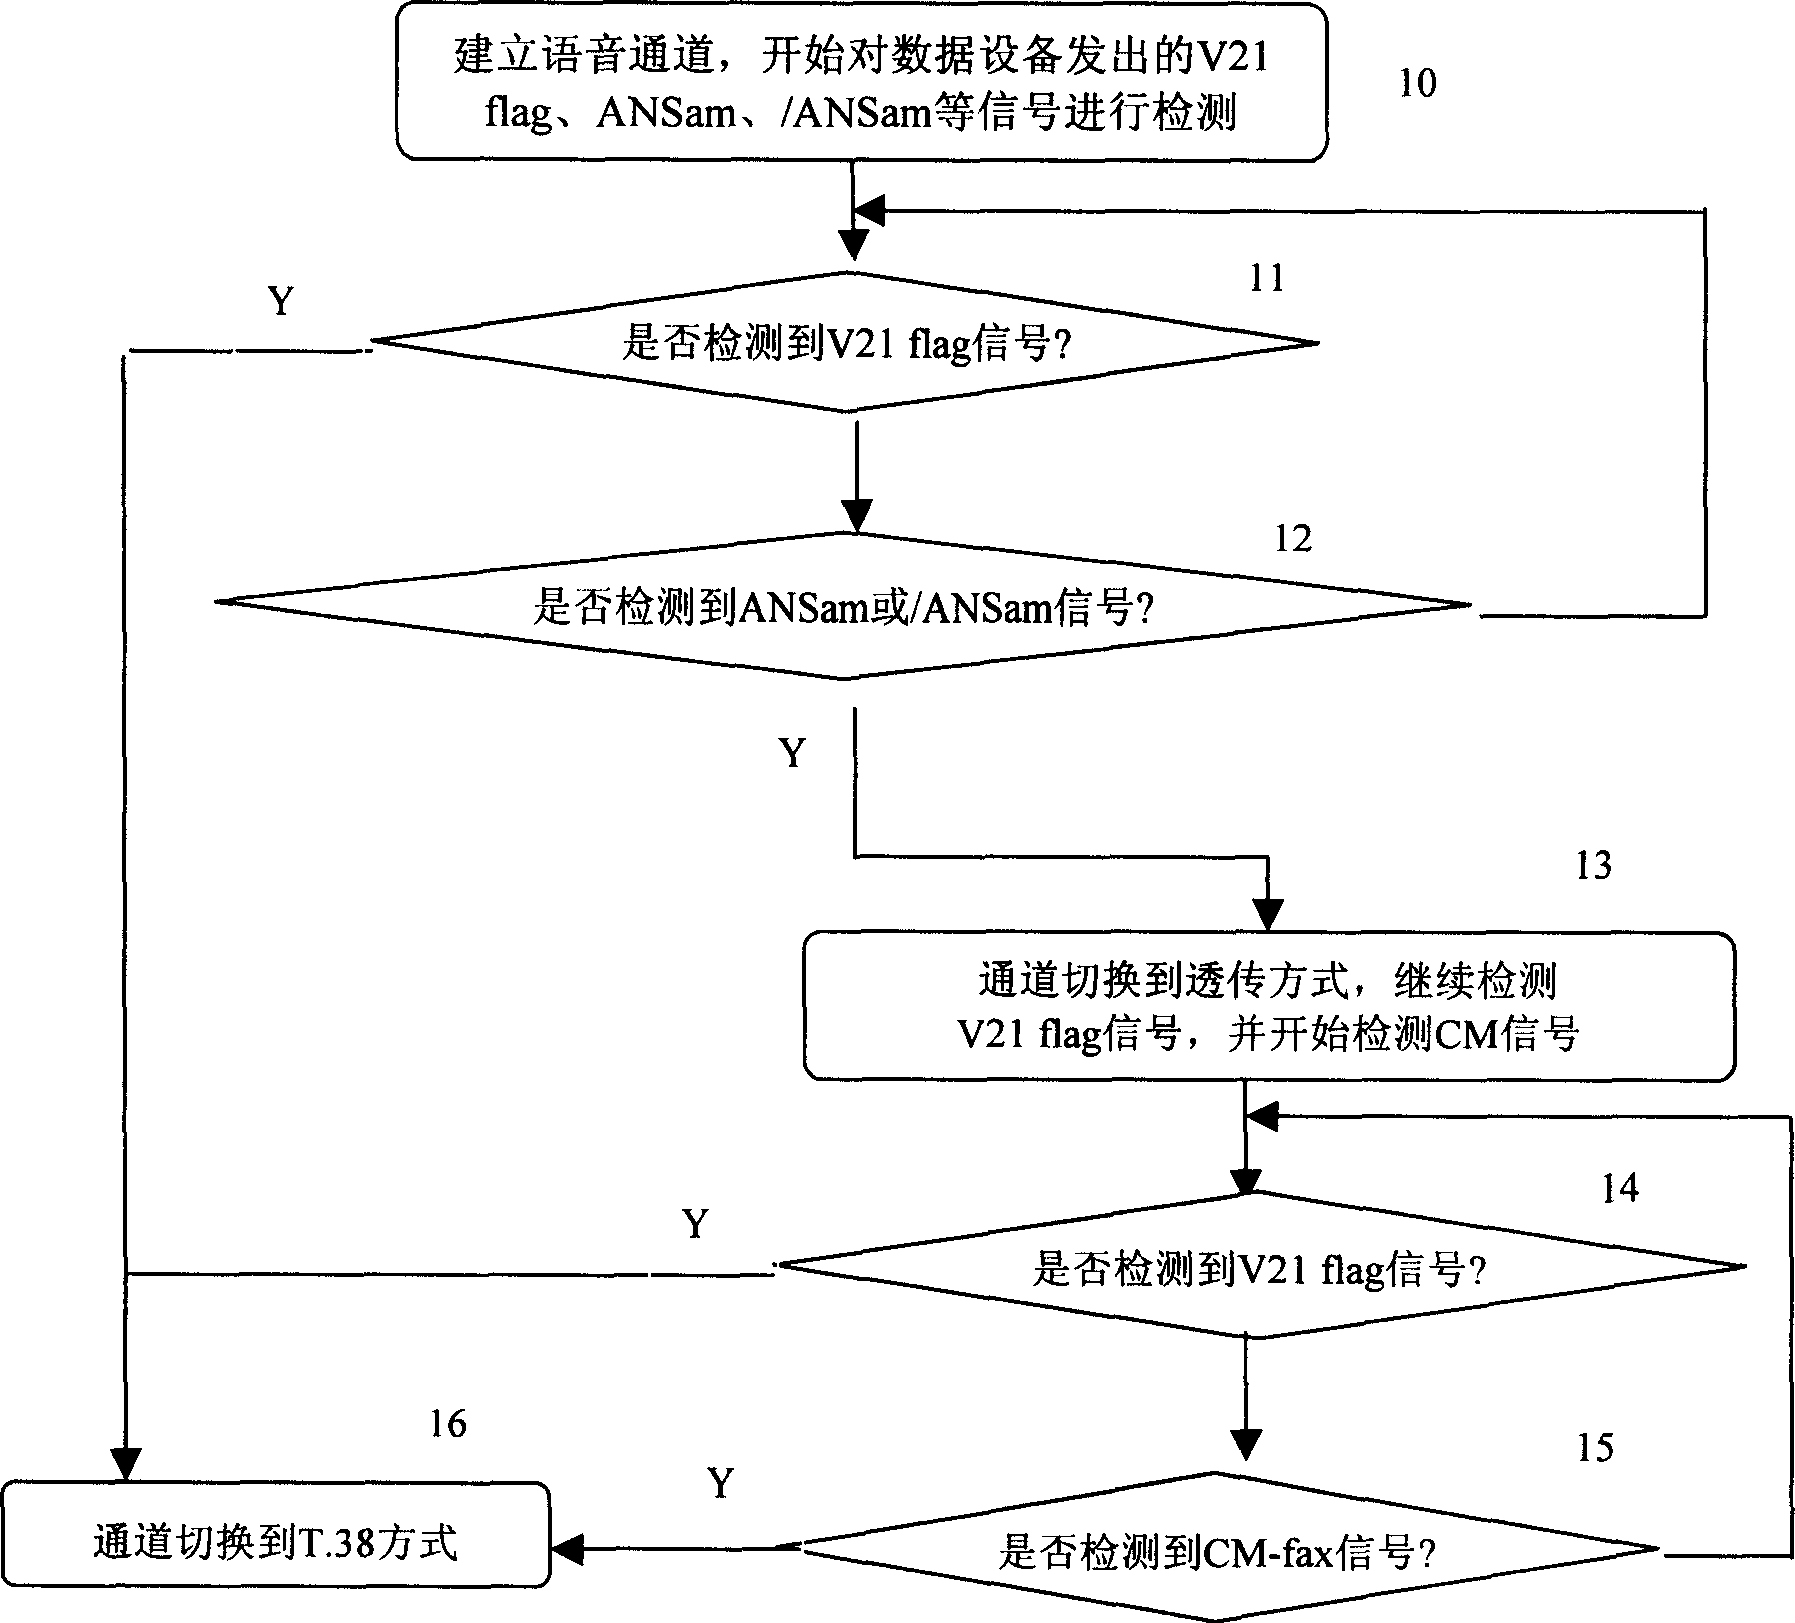 Realization method for media stream conversion channel working mode switching on gateway